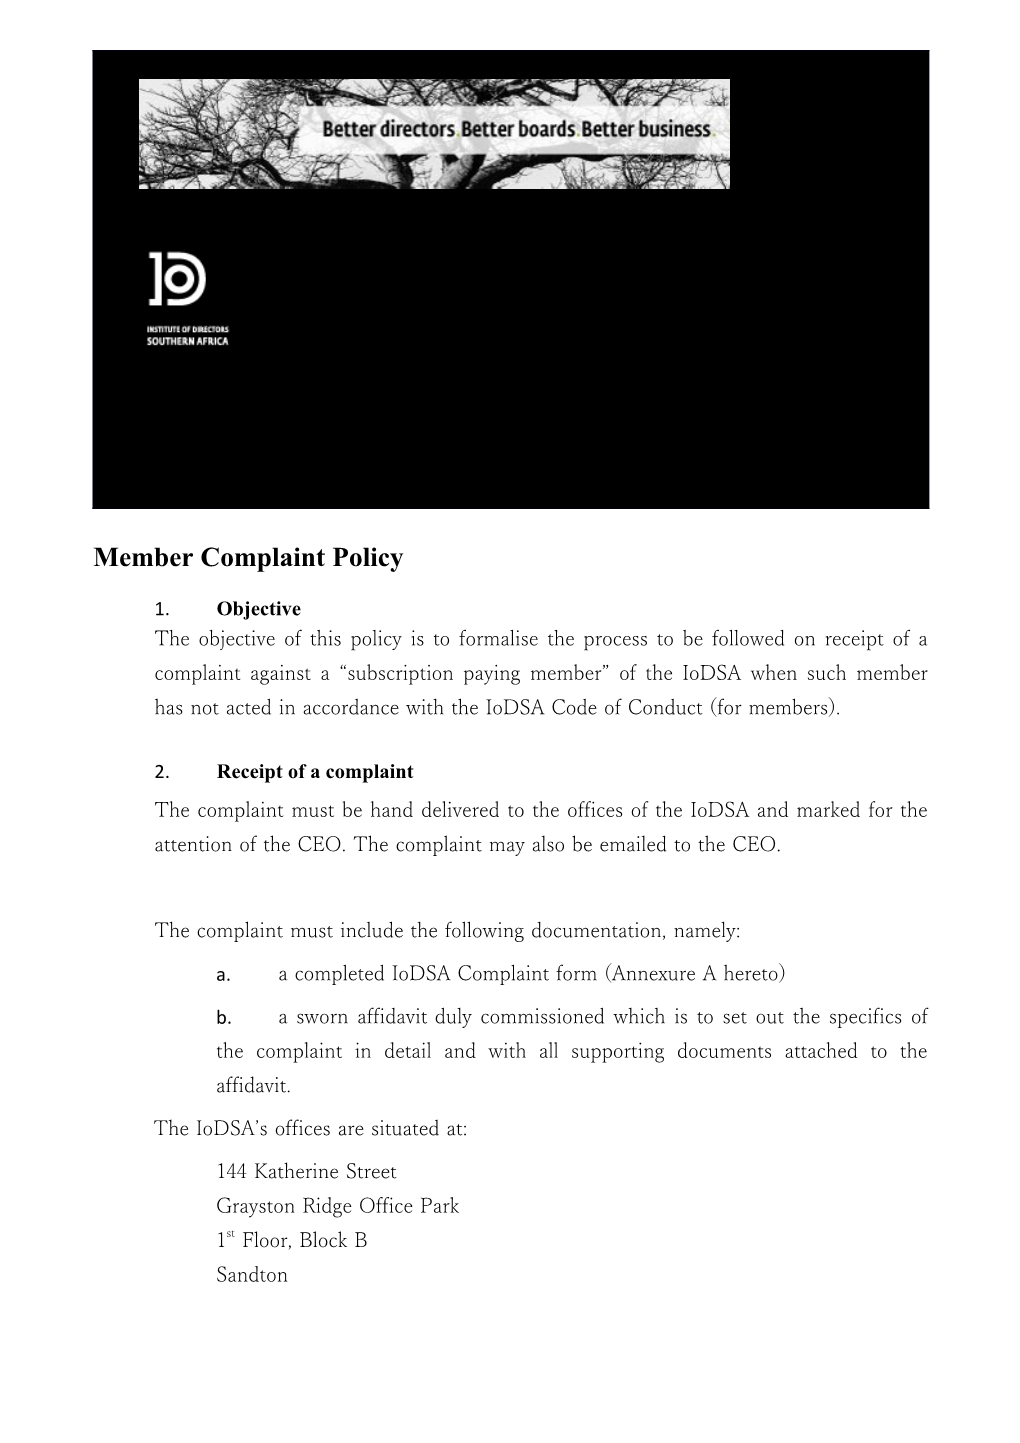 Member Complaint Policy